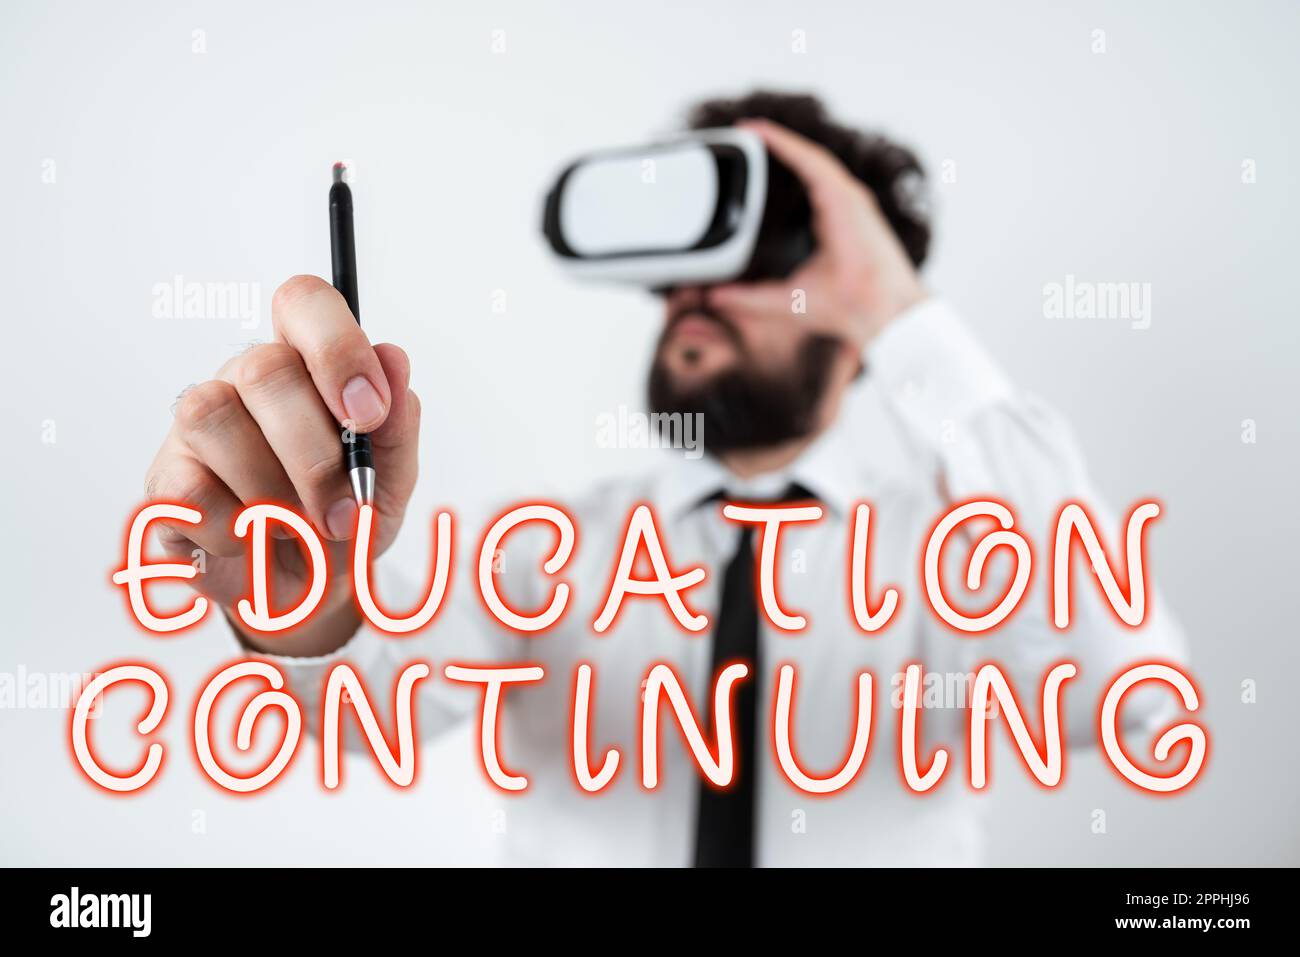 Writing displaying text Education Continuing. Internet Concept acquisition of knowledge and skills thru training Stock Photo